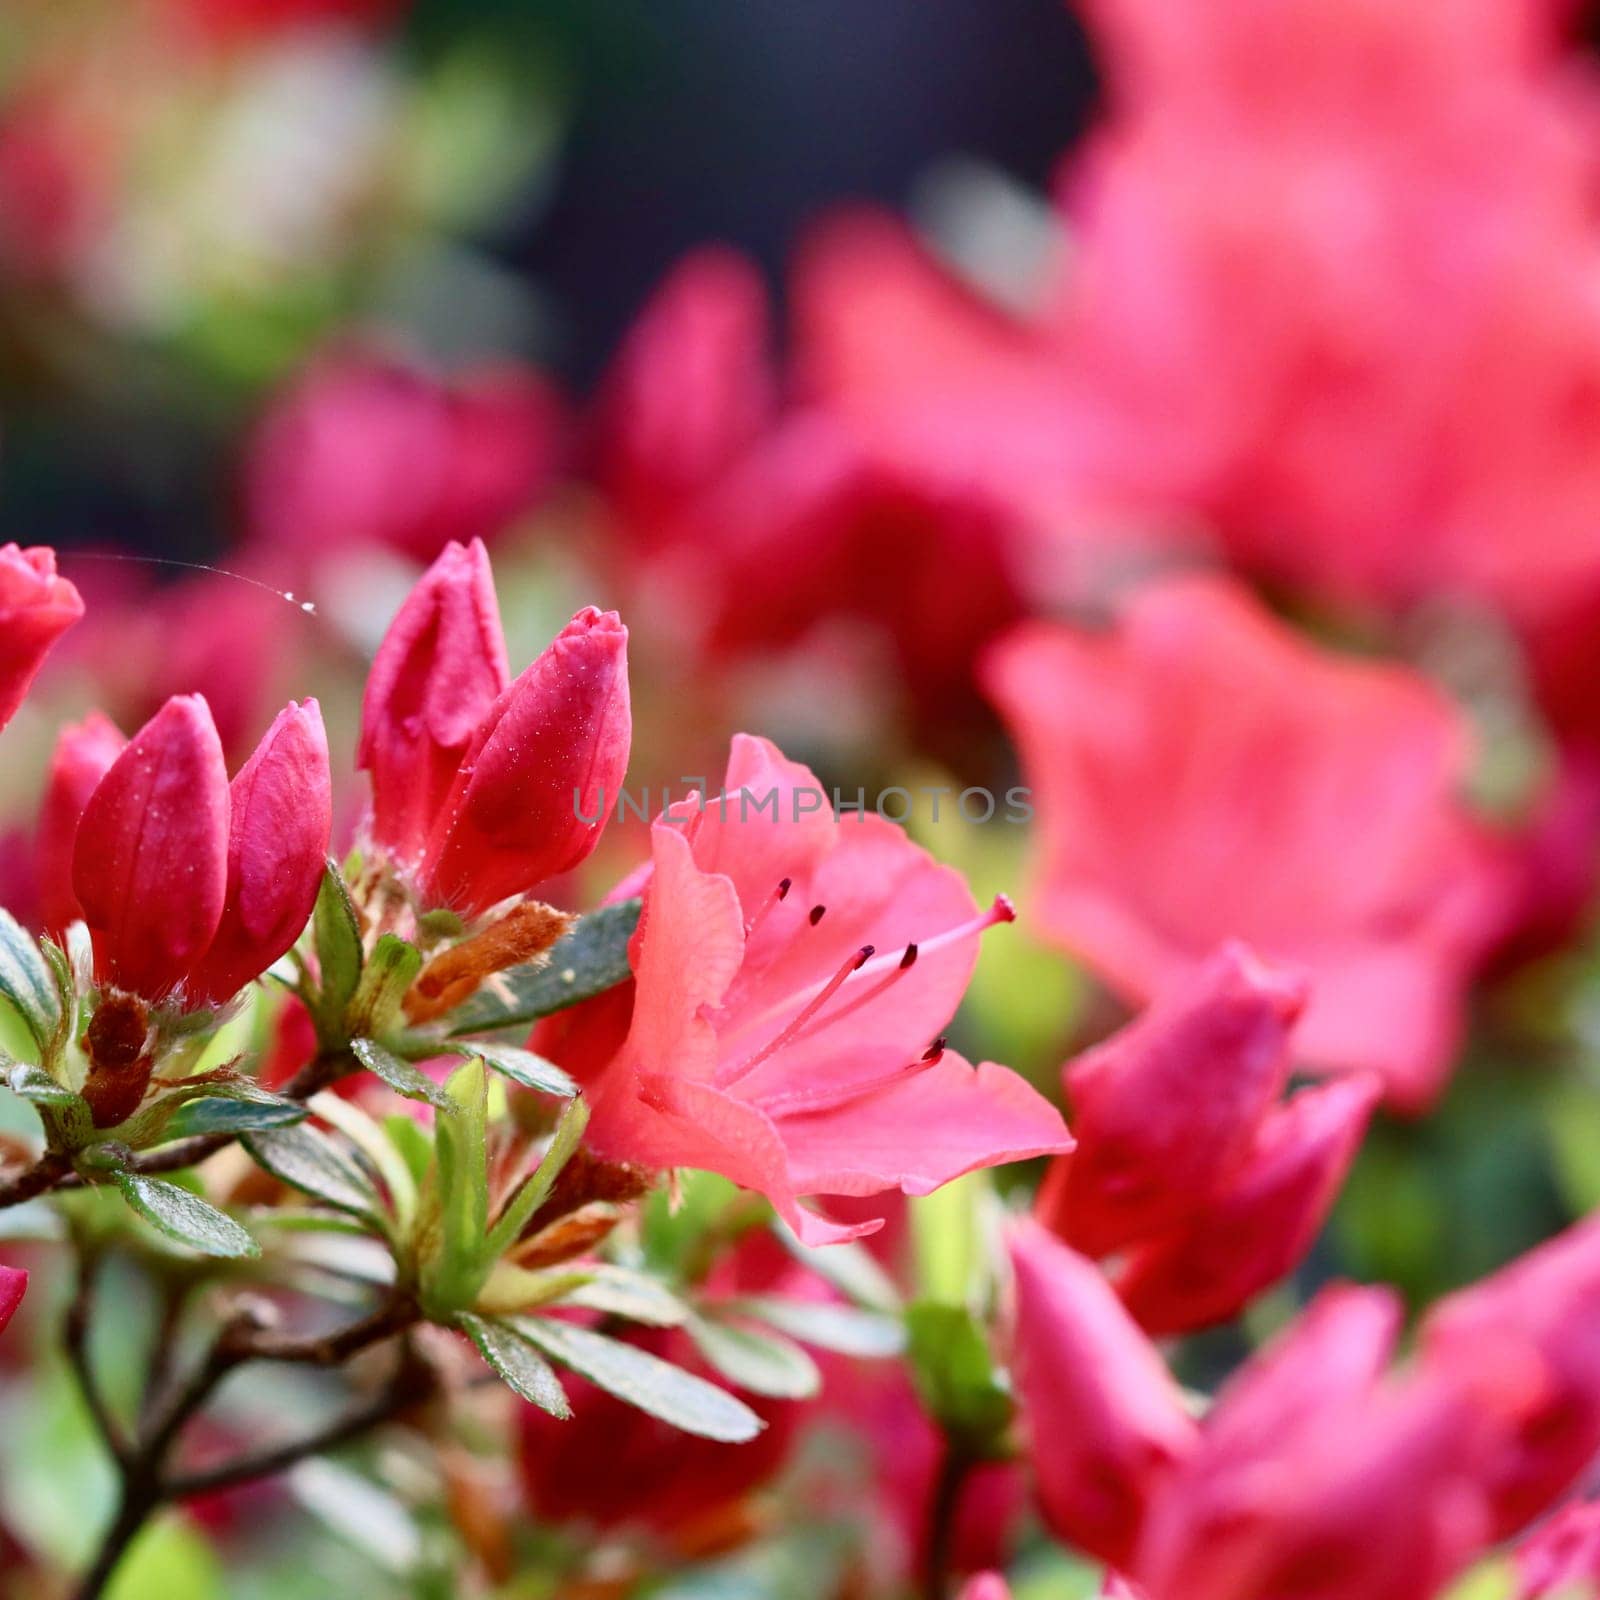 Blooming red azalea flowers in the spring garden. Gardening concept. Floral background